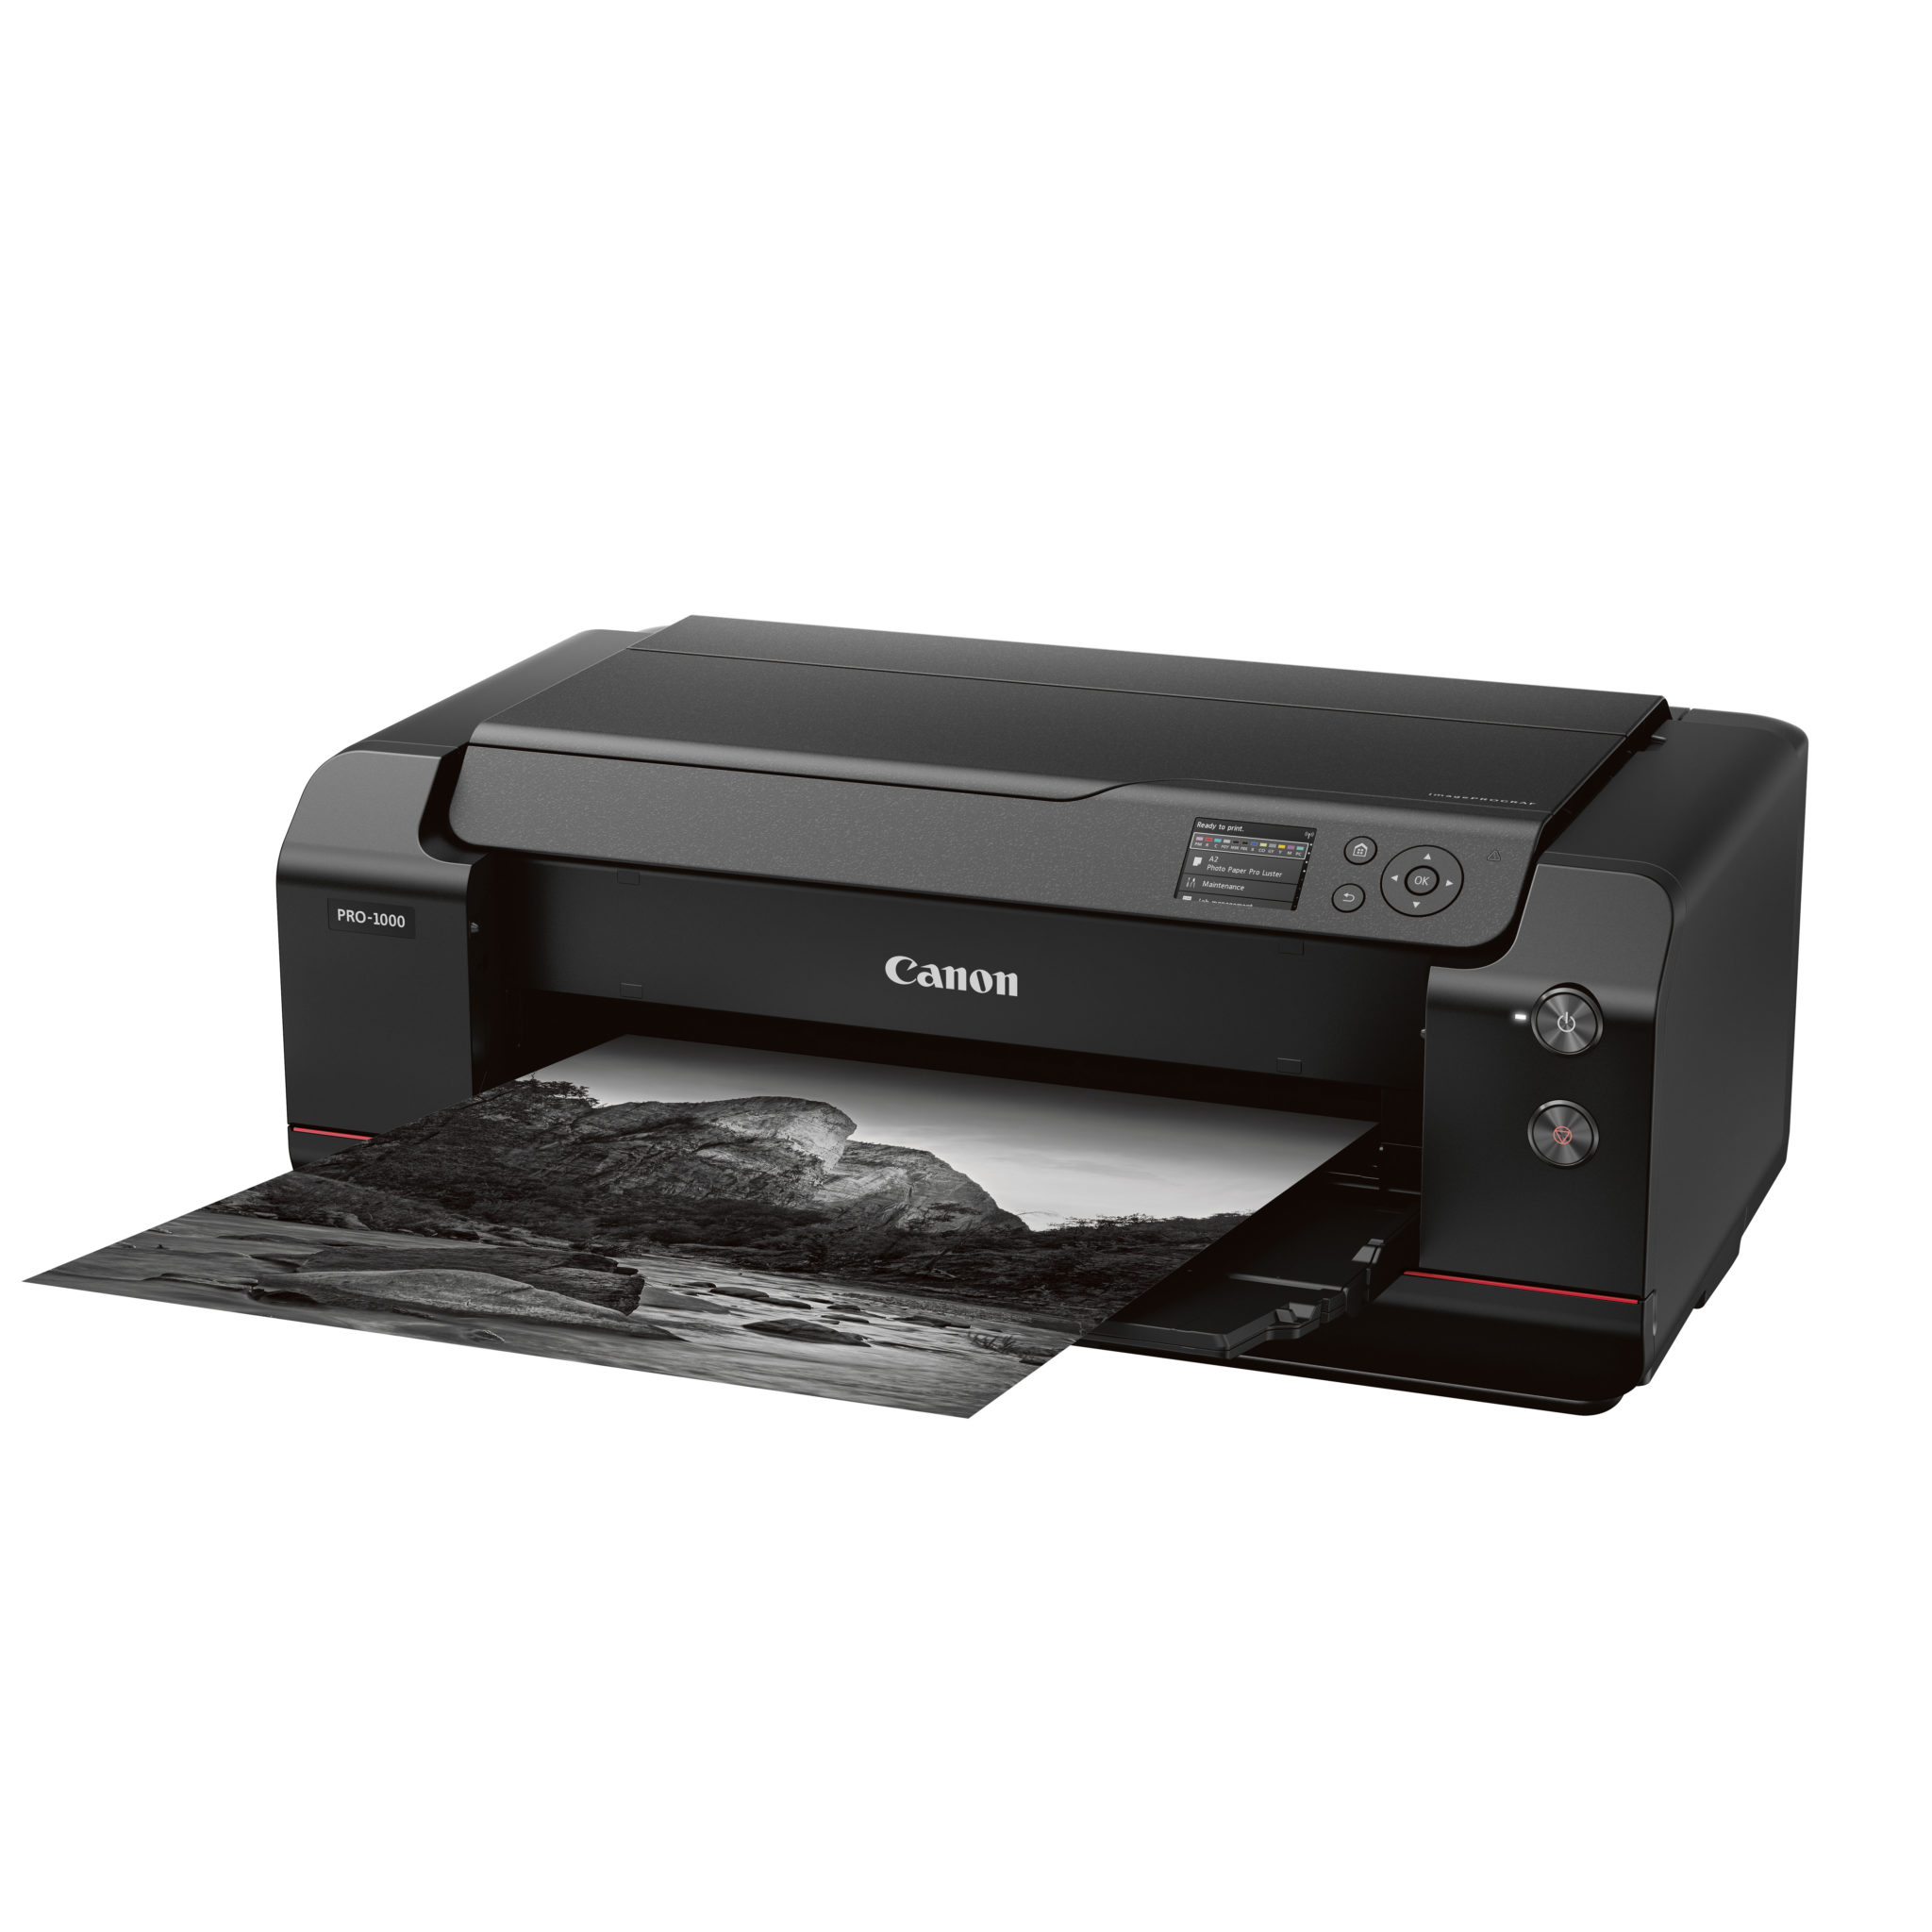 The Canon imagePROGRAF PRO-1000 Is a Very High End Printer